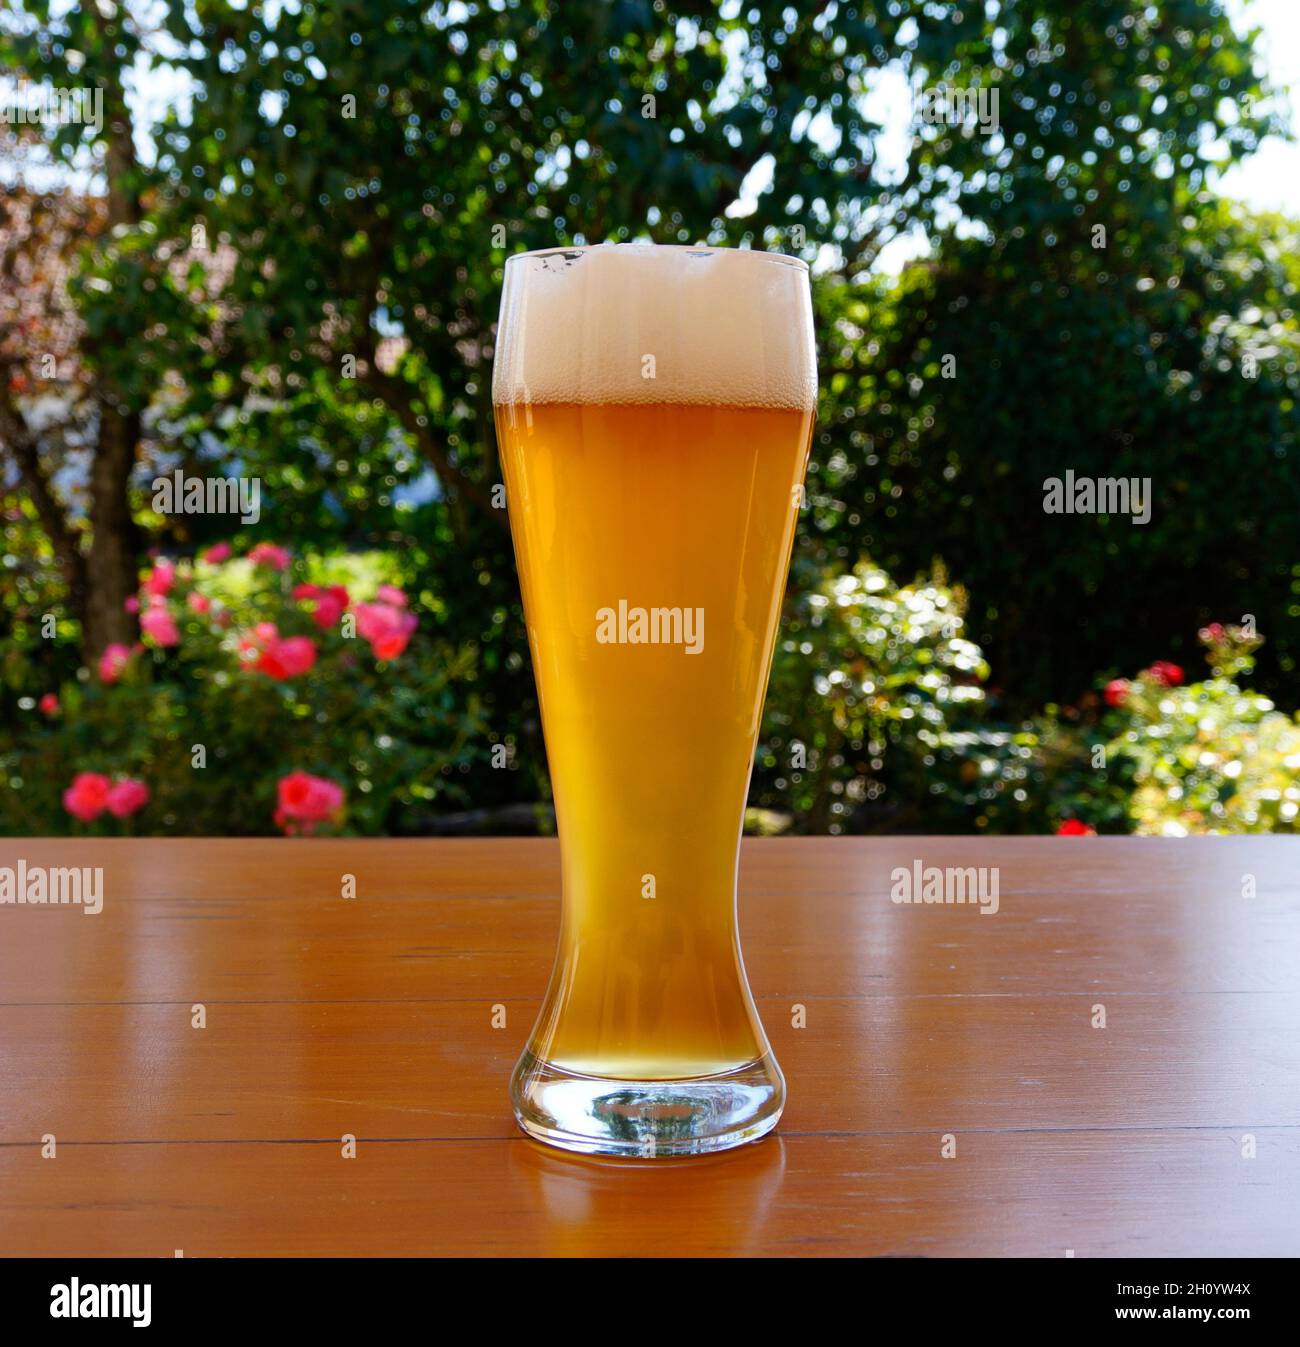 https://c8.alamy.com/comp/2H0YW4X/a-glass-with-delicious-german-wheat-beer-2H0YW4X.jpg